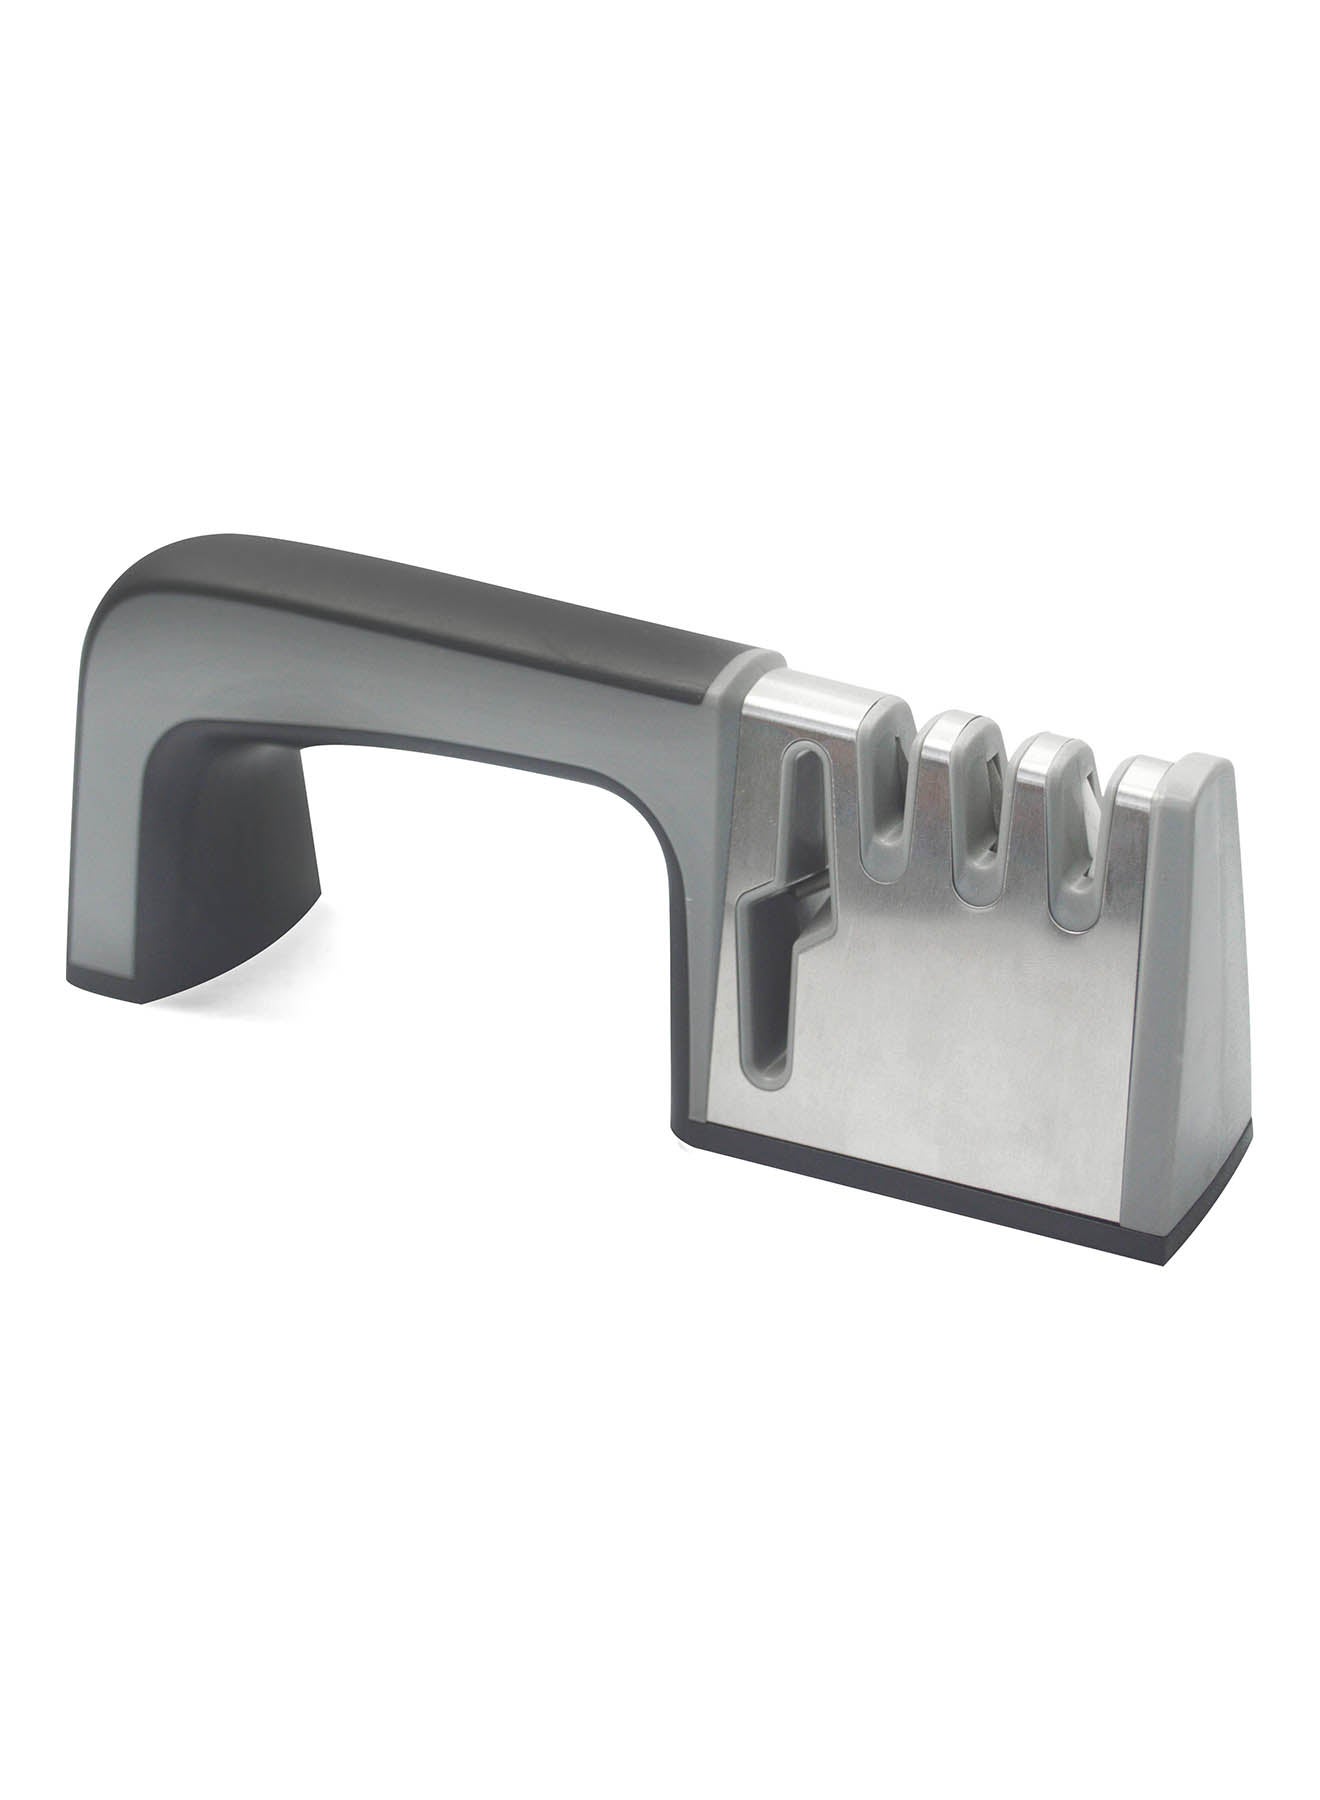 Knife Sharpener - With Stainless Steel Blades - Surdy And Safe - Essential Kitchen Accessories - For Kitchen Knives - Silver 